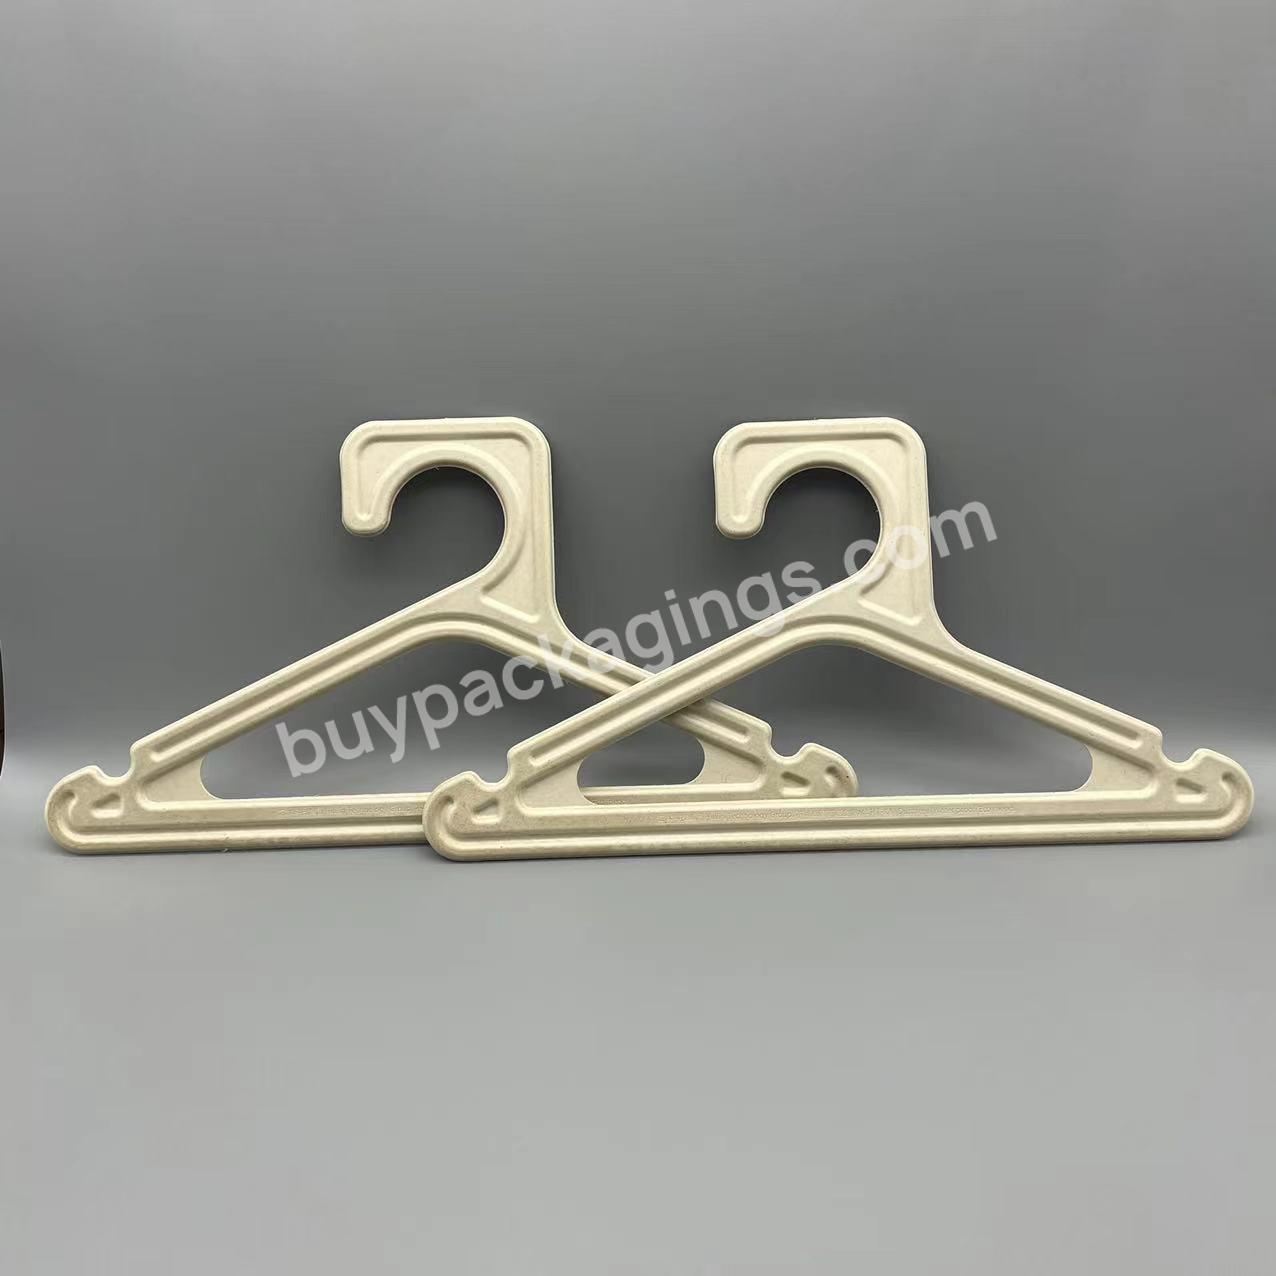 Recyclable Paper Cardboard Sugarcane Fiber Molded Pulp Clothes Hangers - Buy Cardboard Clothes Hangers,Recyclable Paper Hangers,Pulp Clothes Hanger.